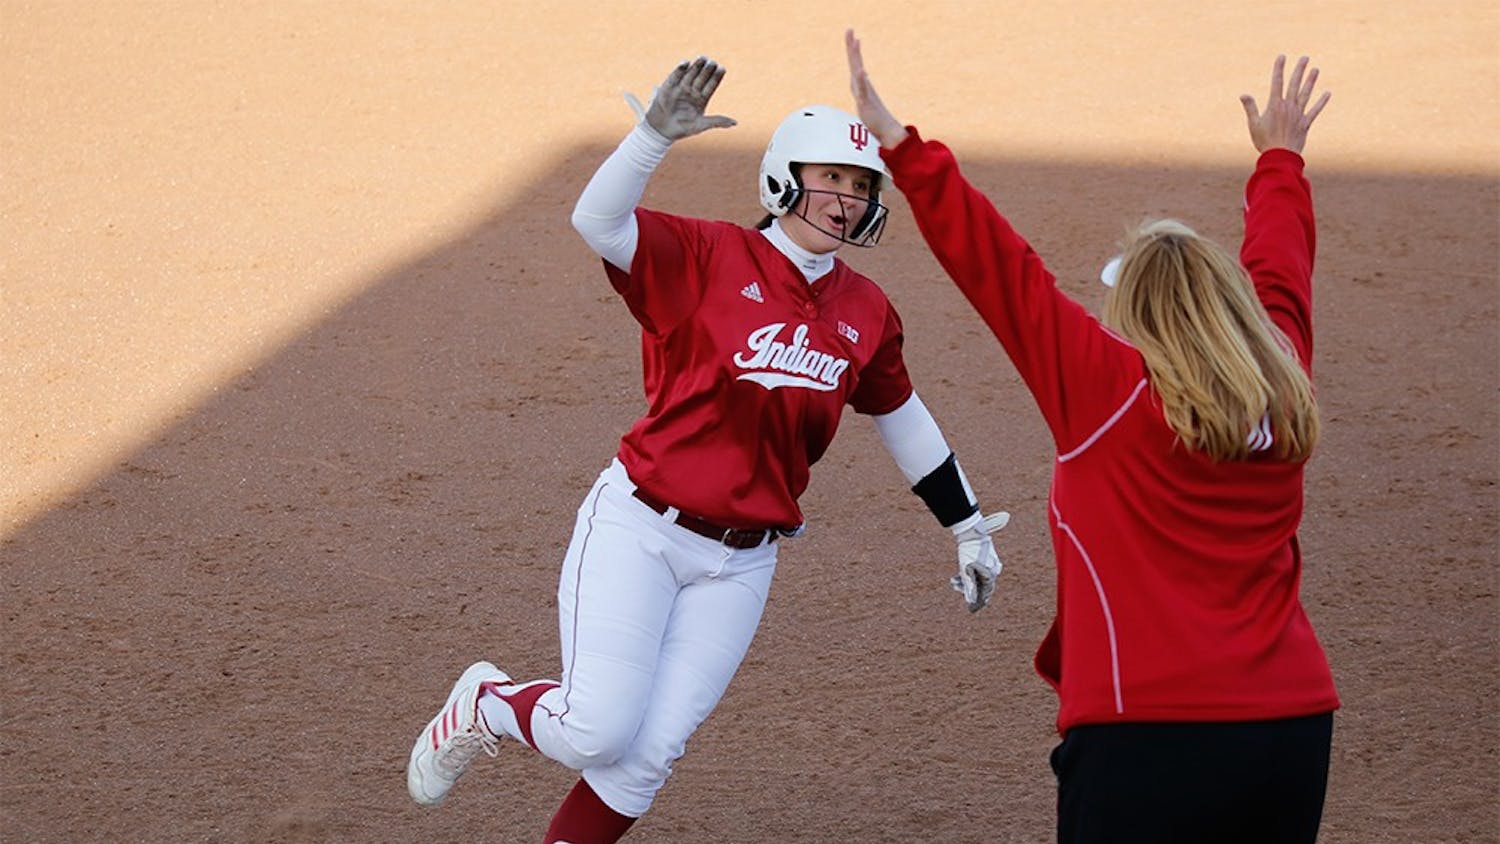 Senior Michelle Huber high-fives her coach, Michelle Gardner, after hitting a home run during IU's first game against Purdue April 22, 2015 at Andy Mohr Field.